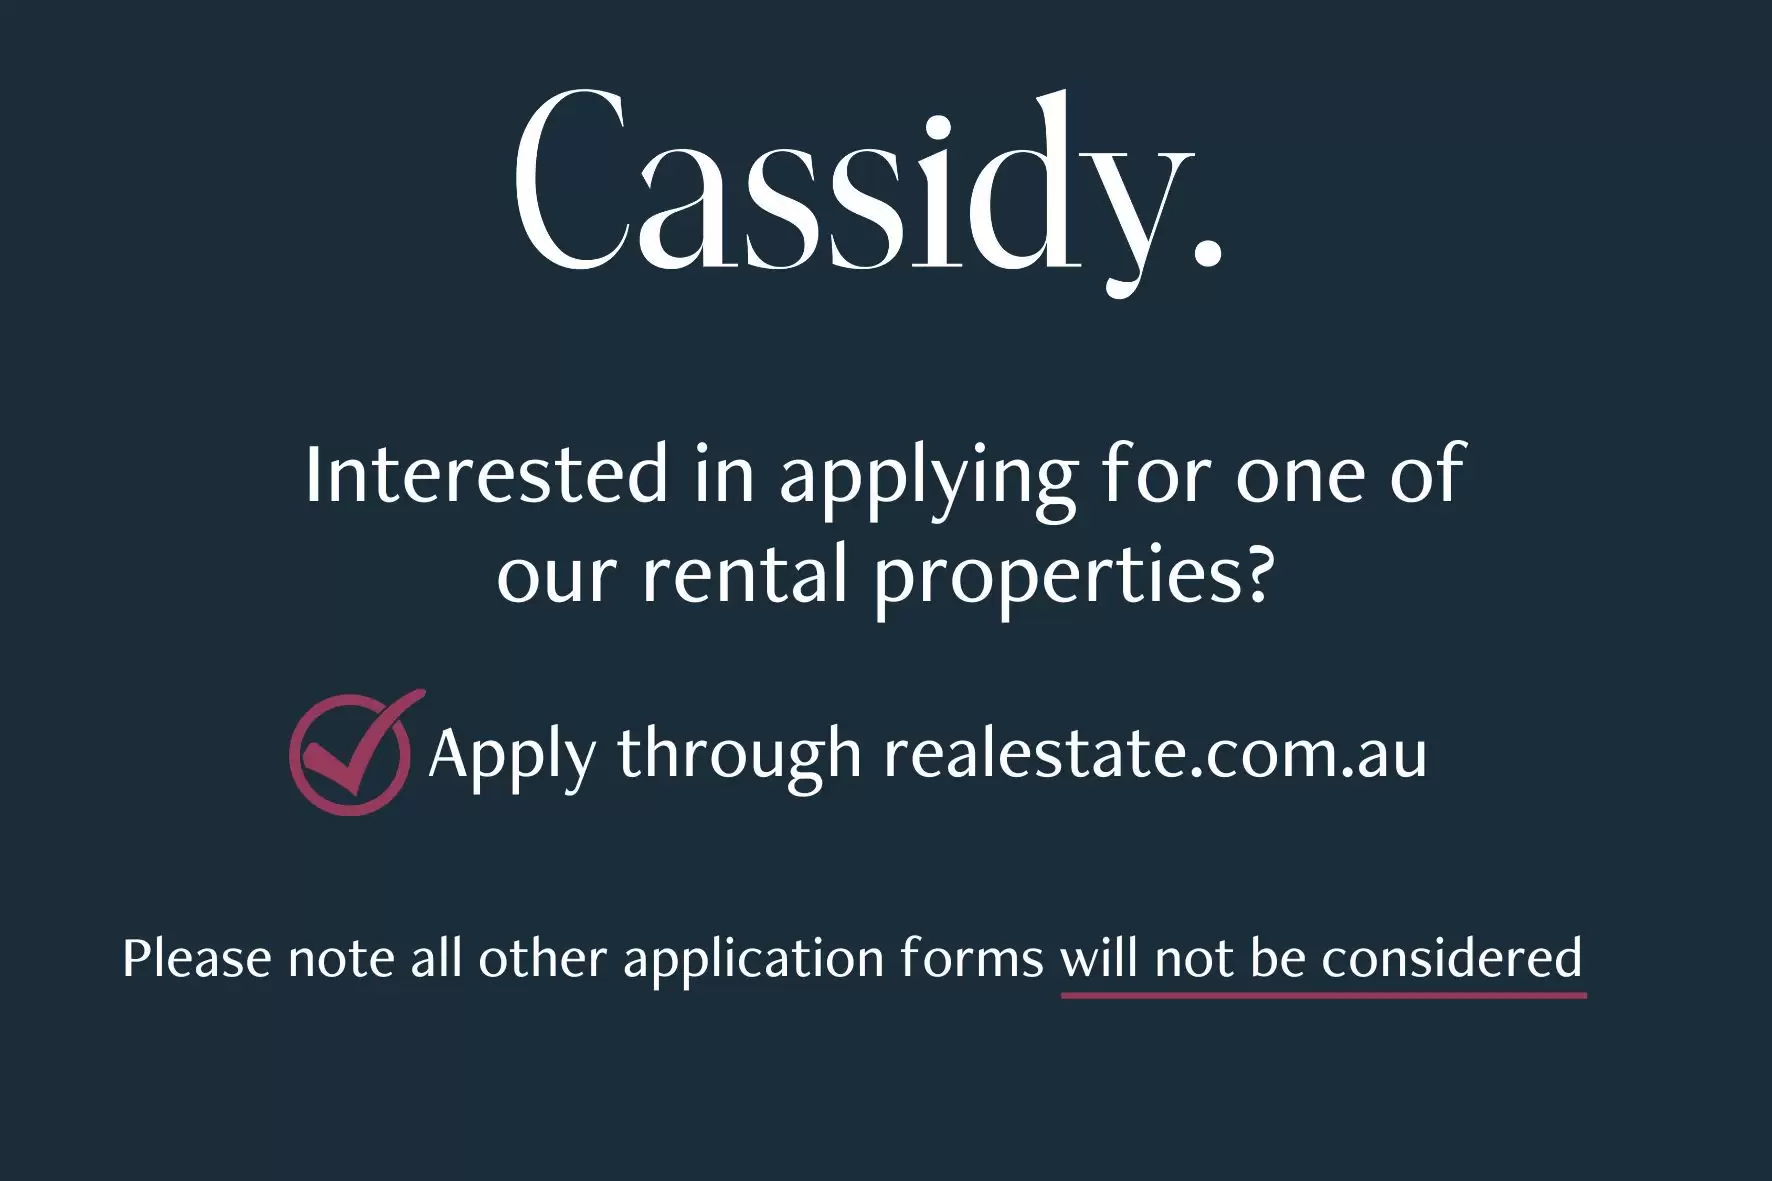 7/6 Pope Street, Ryde For Lease by Cassidy Real Estate - image 1